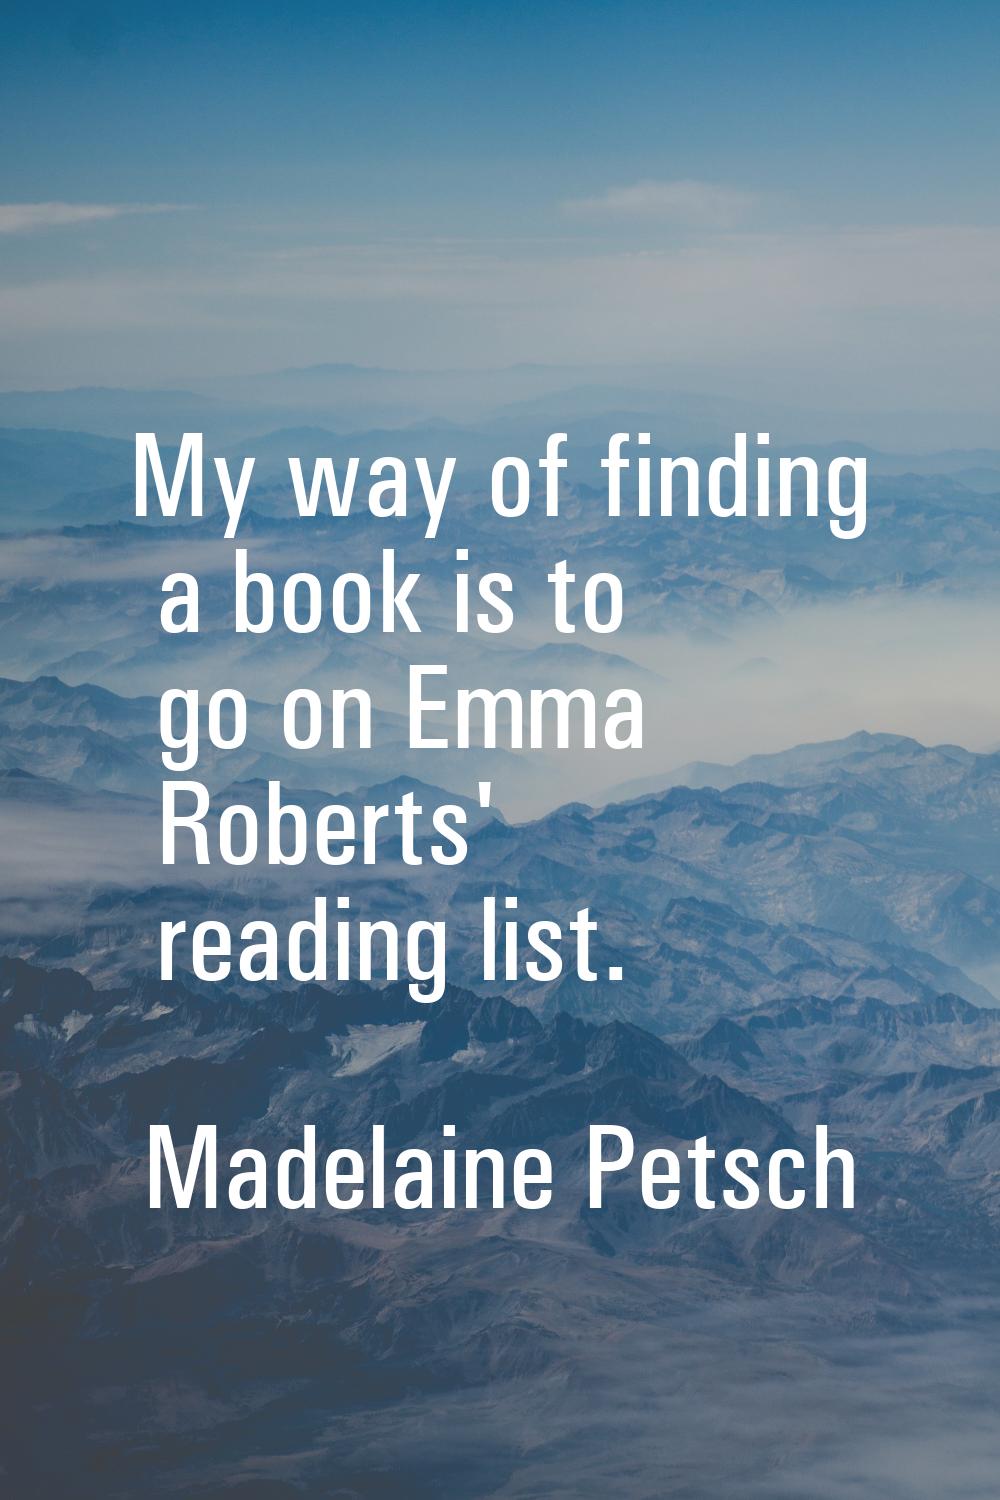 My way of finding a book is to go on Emma Roberts' reading list.